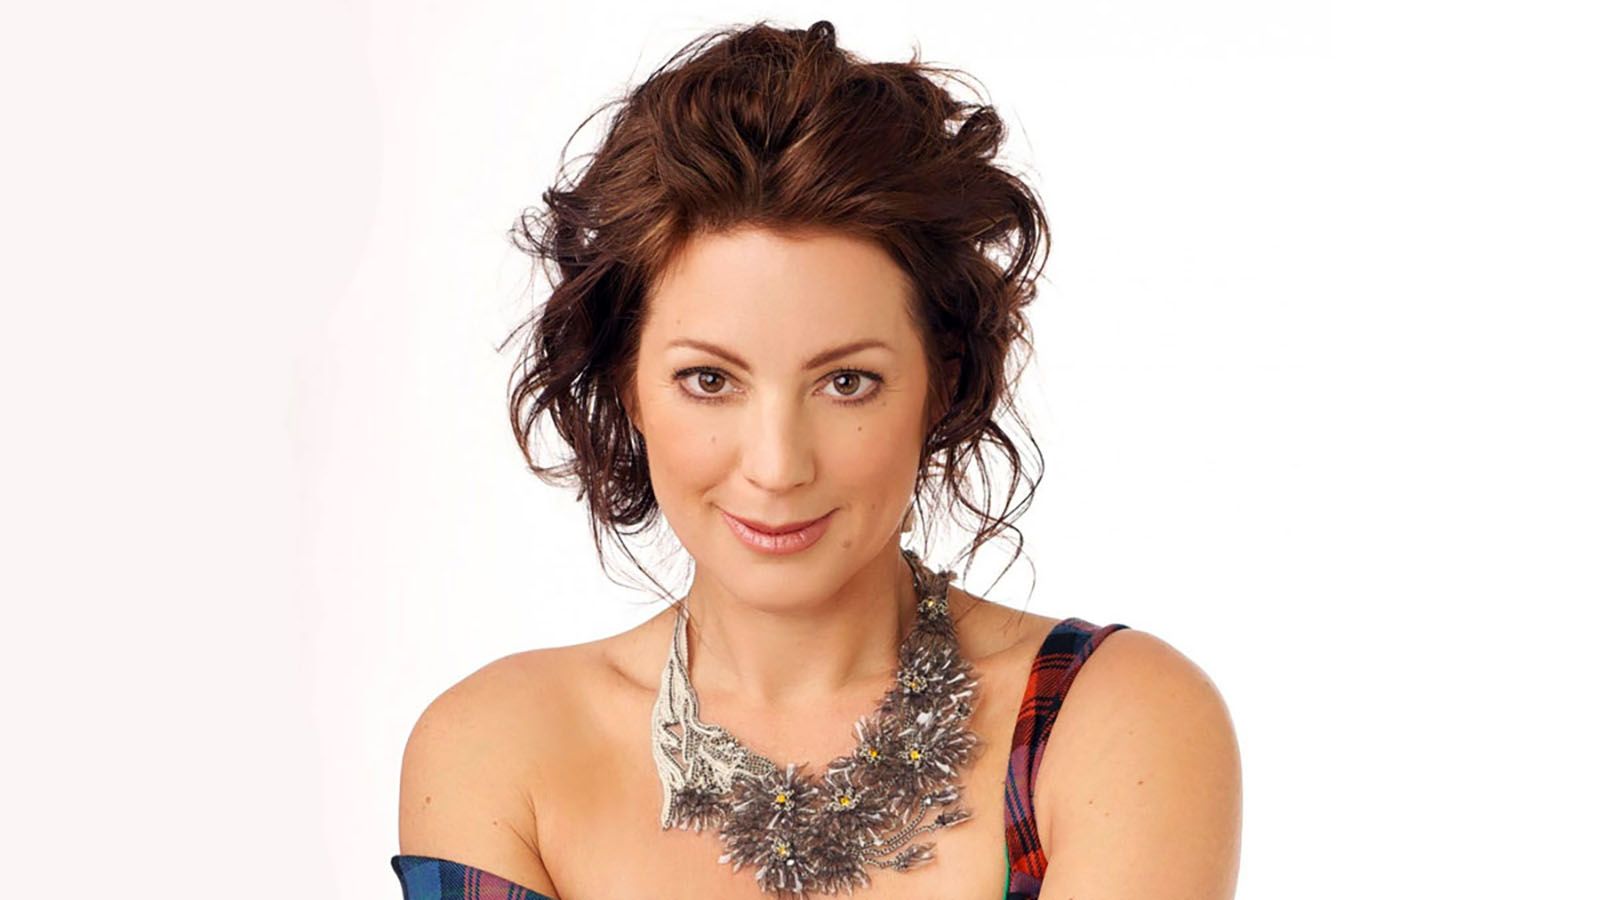 Singer-songwriter Sarah McLachlan is celebrating the 30th anniversary of 'Fumbling Towards Ecstasy" with a tour.